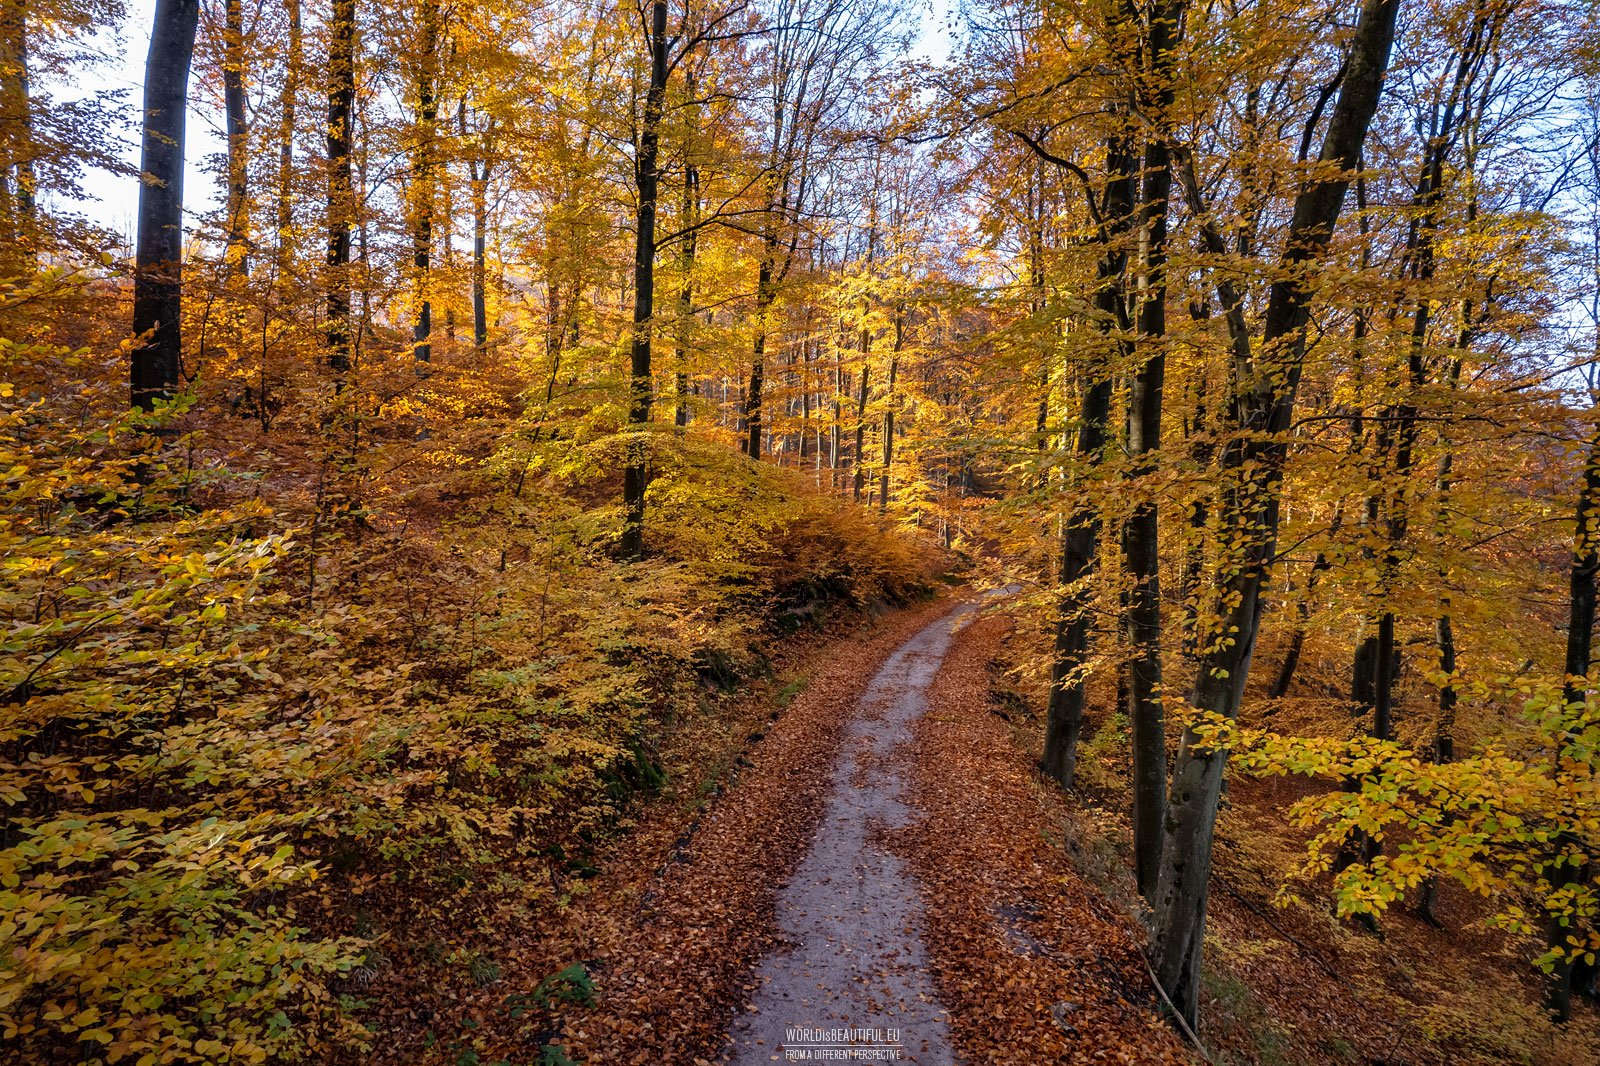 Beech forests in autumn